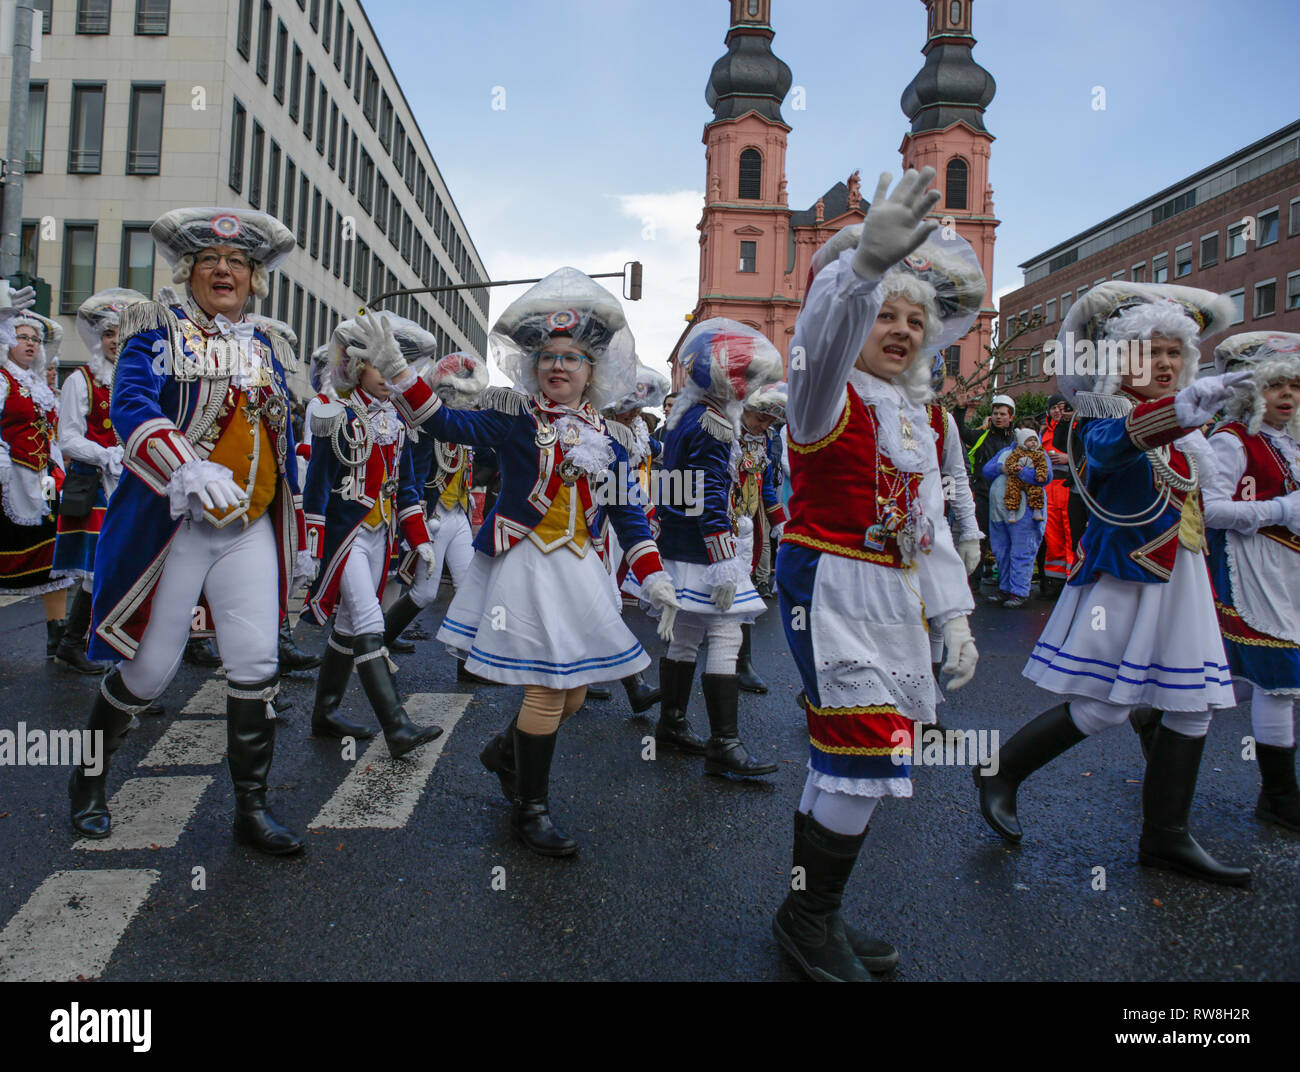 Mainz, Germany. 04th Mar, 2019. Majorettes from the Mainzer Ranzengarde march in the parade. Around half a million people lined the streets of Mainz for the traditional Rose Monday Carnival Parade. The 9 km long parade with over 8,500 participants is one of the three large Rose Monday Parades in Germany. Credit: Michael Debets/Pacific Press/Alamy Live News Stock Photo